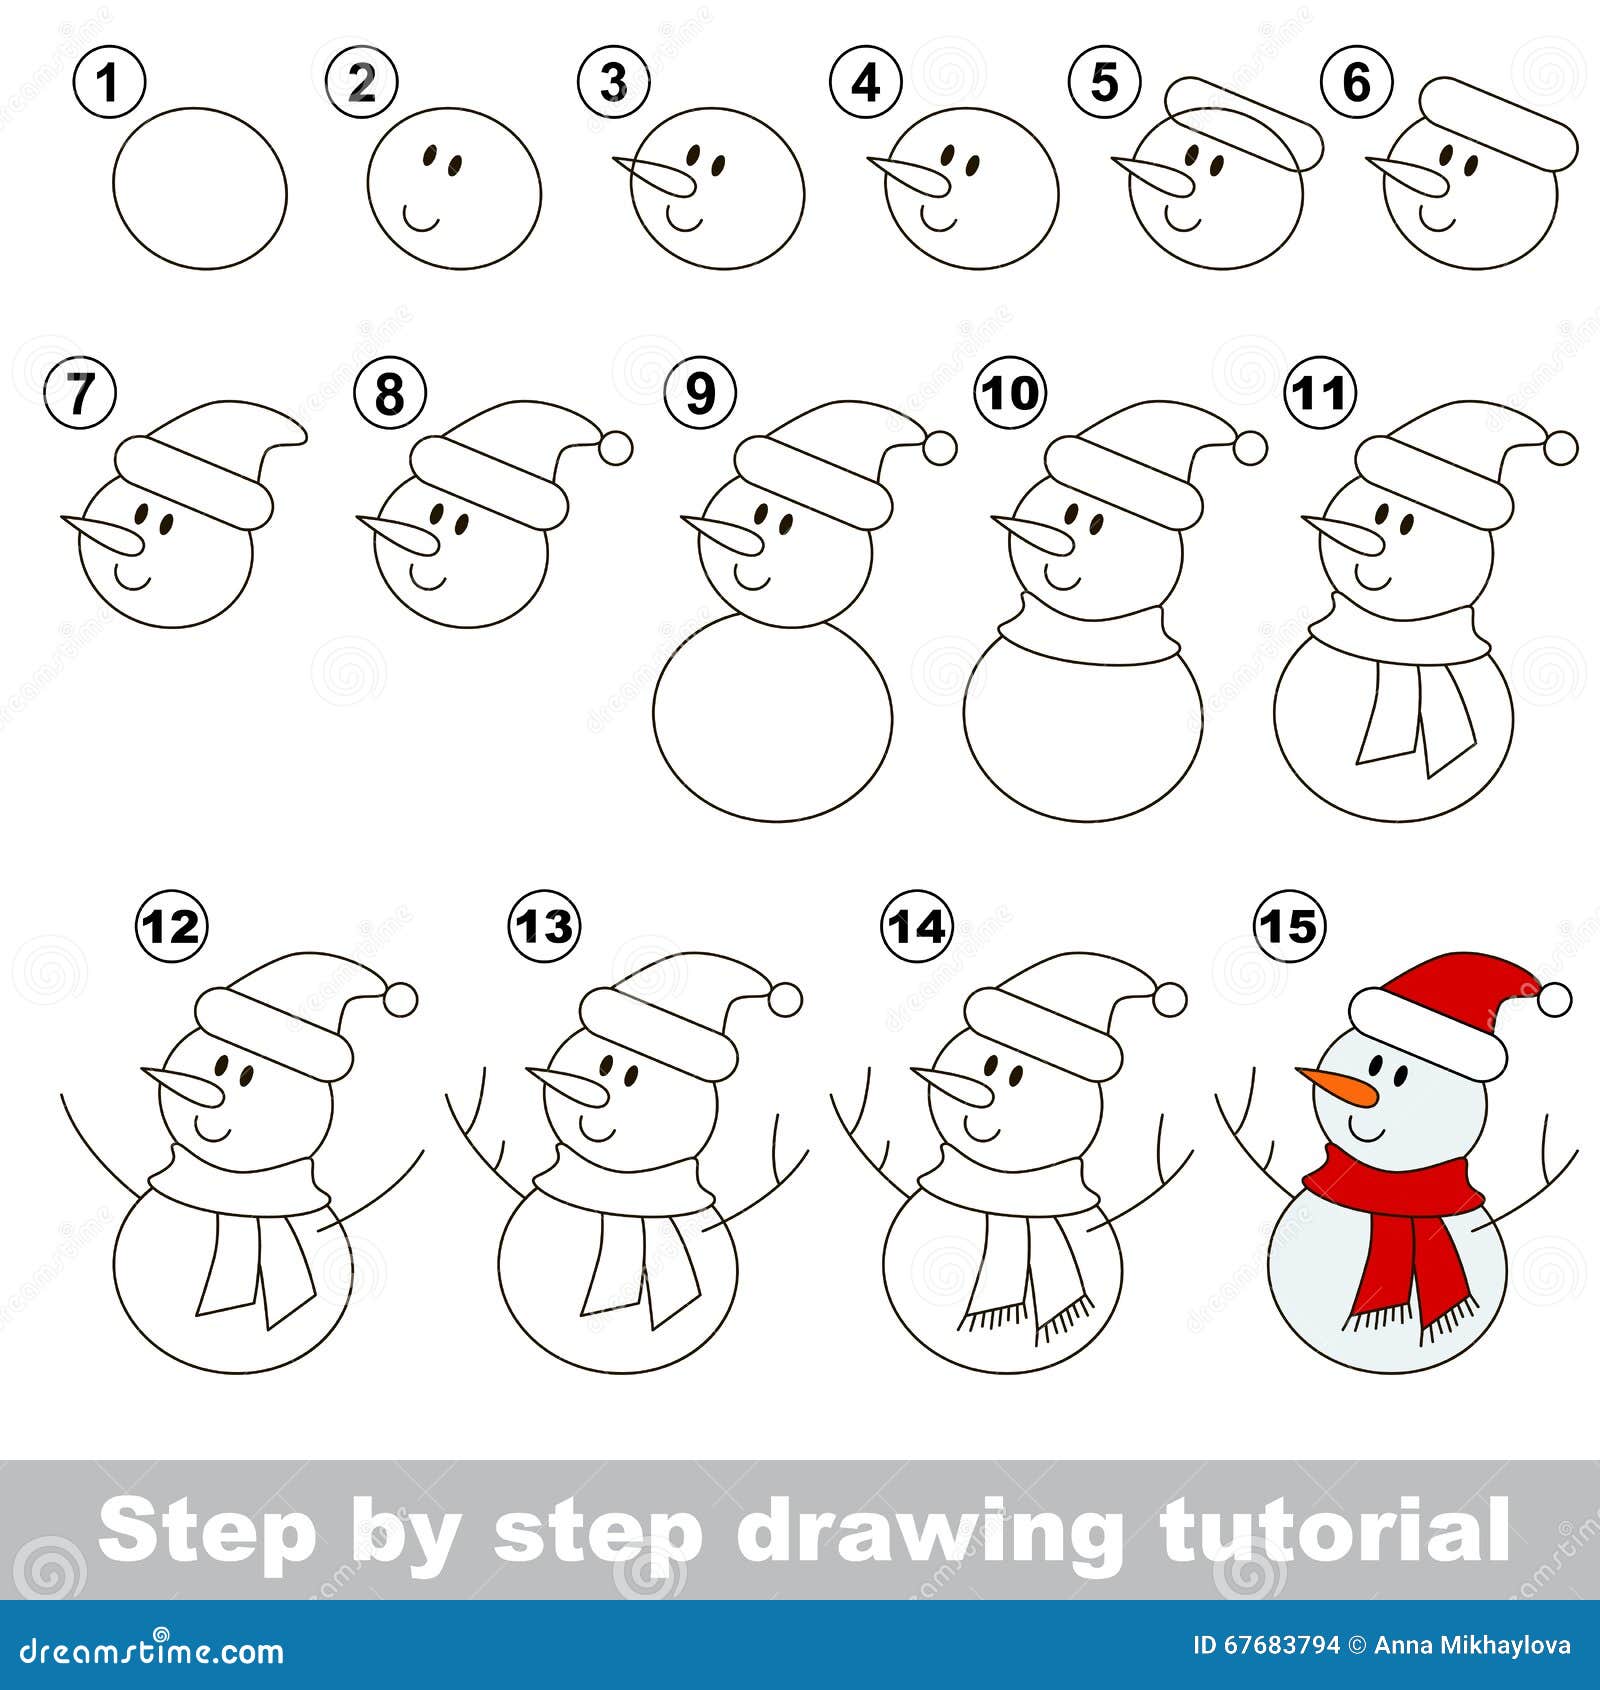 Snowman Drawing Easy | How to draw a Snowman easy step by step drawing |  Painting for beginners - YouTube